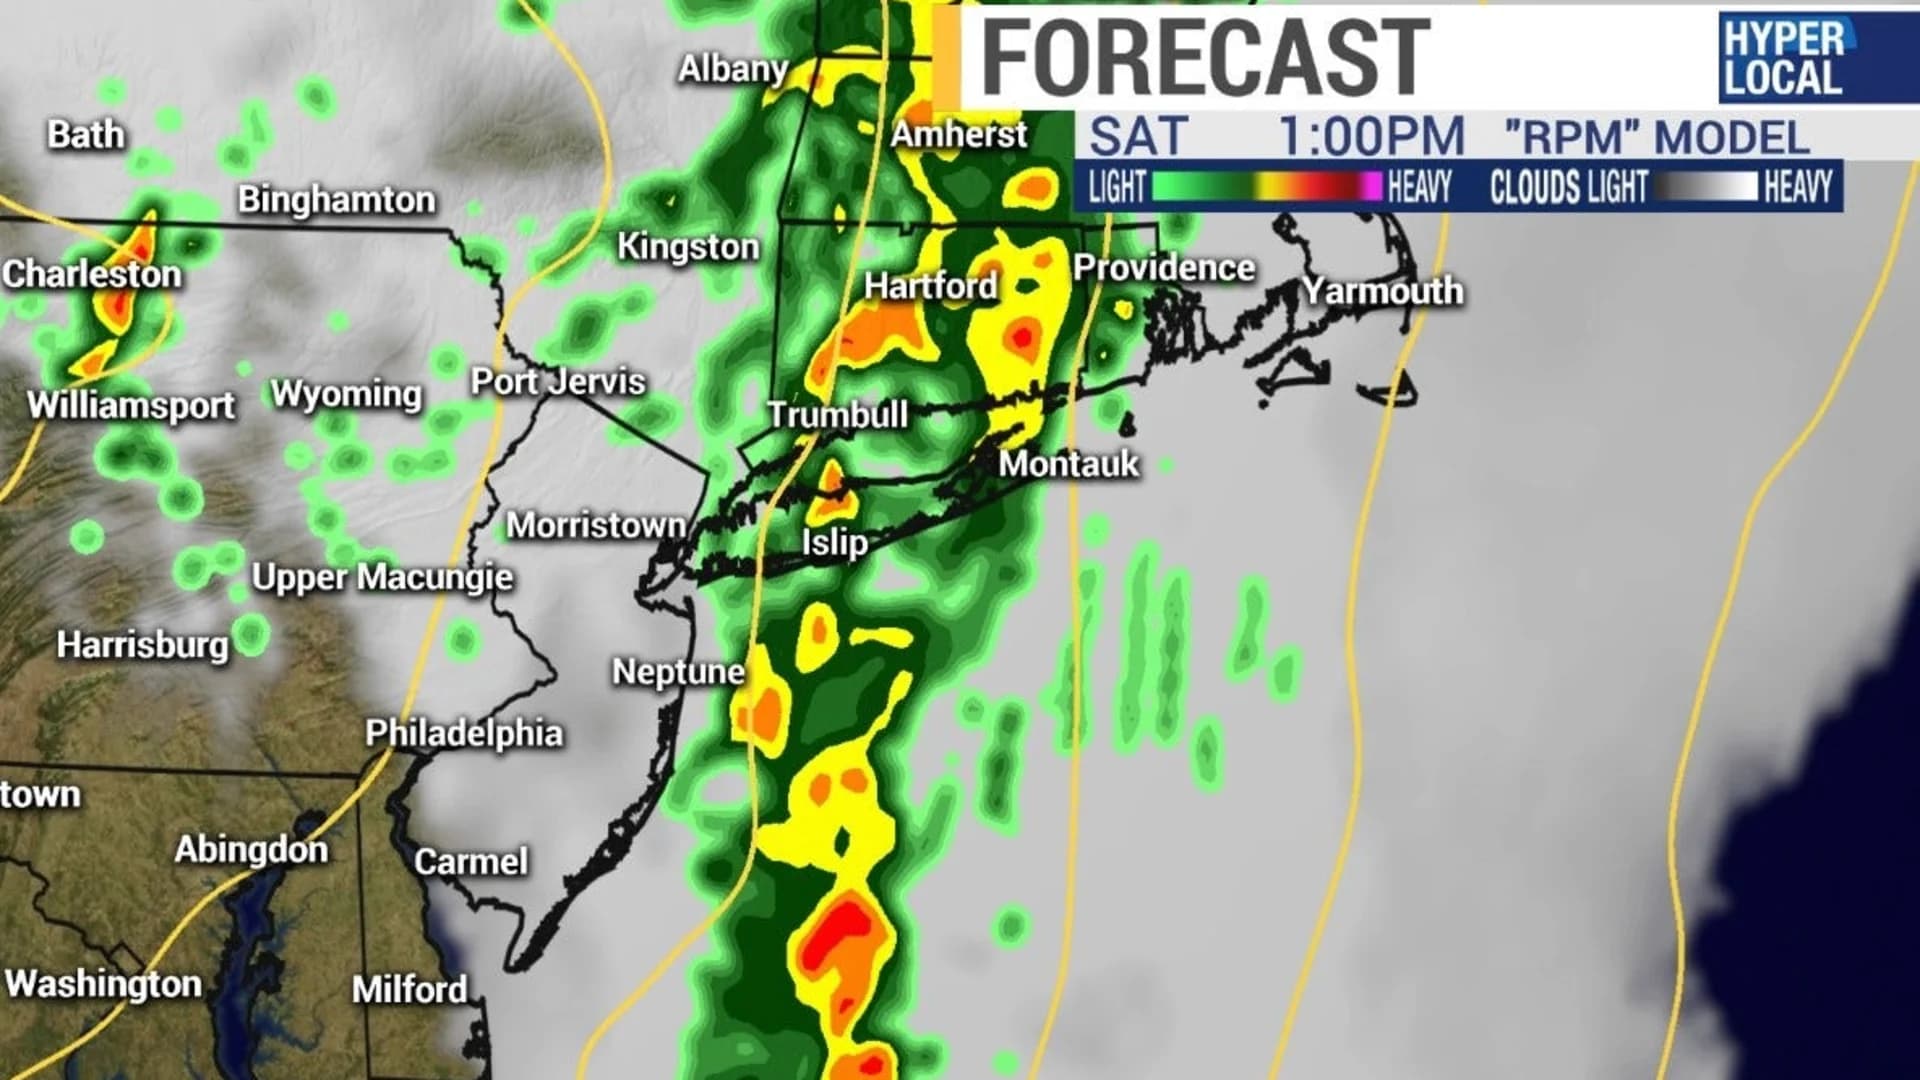 Forecast: Wet start to holiday weekend, flood watch in effect